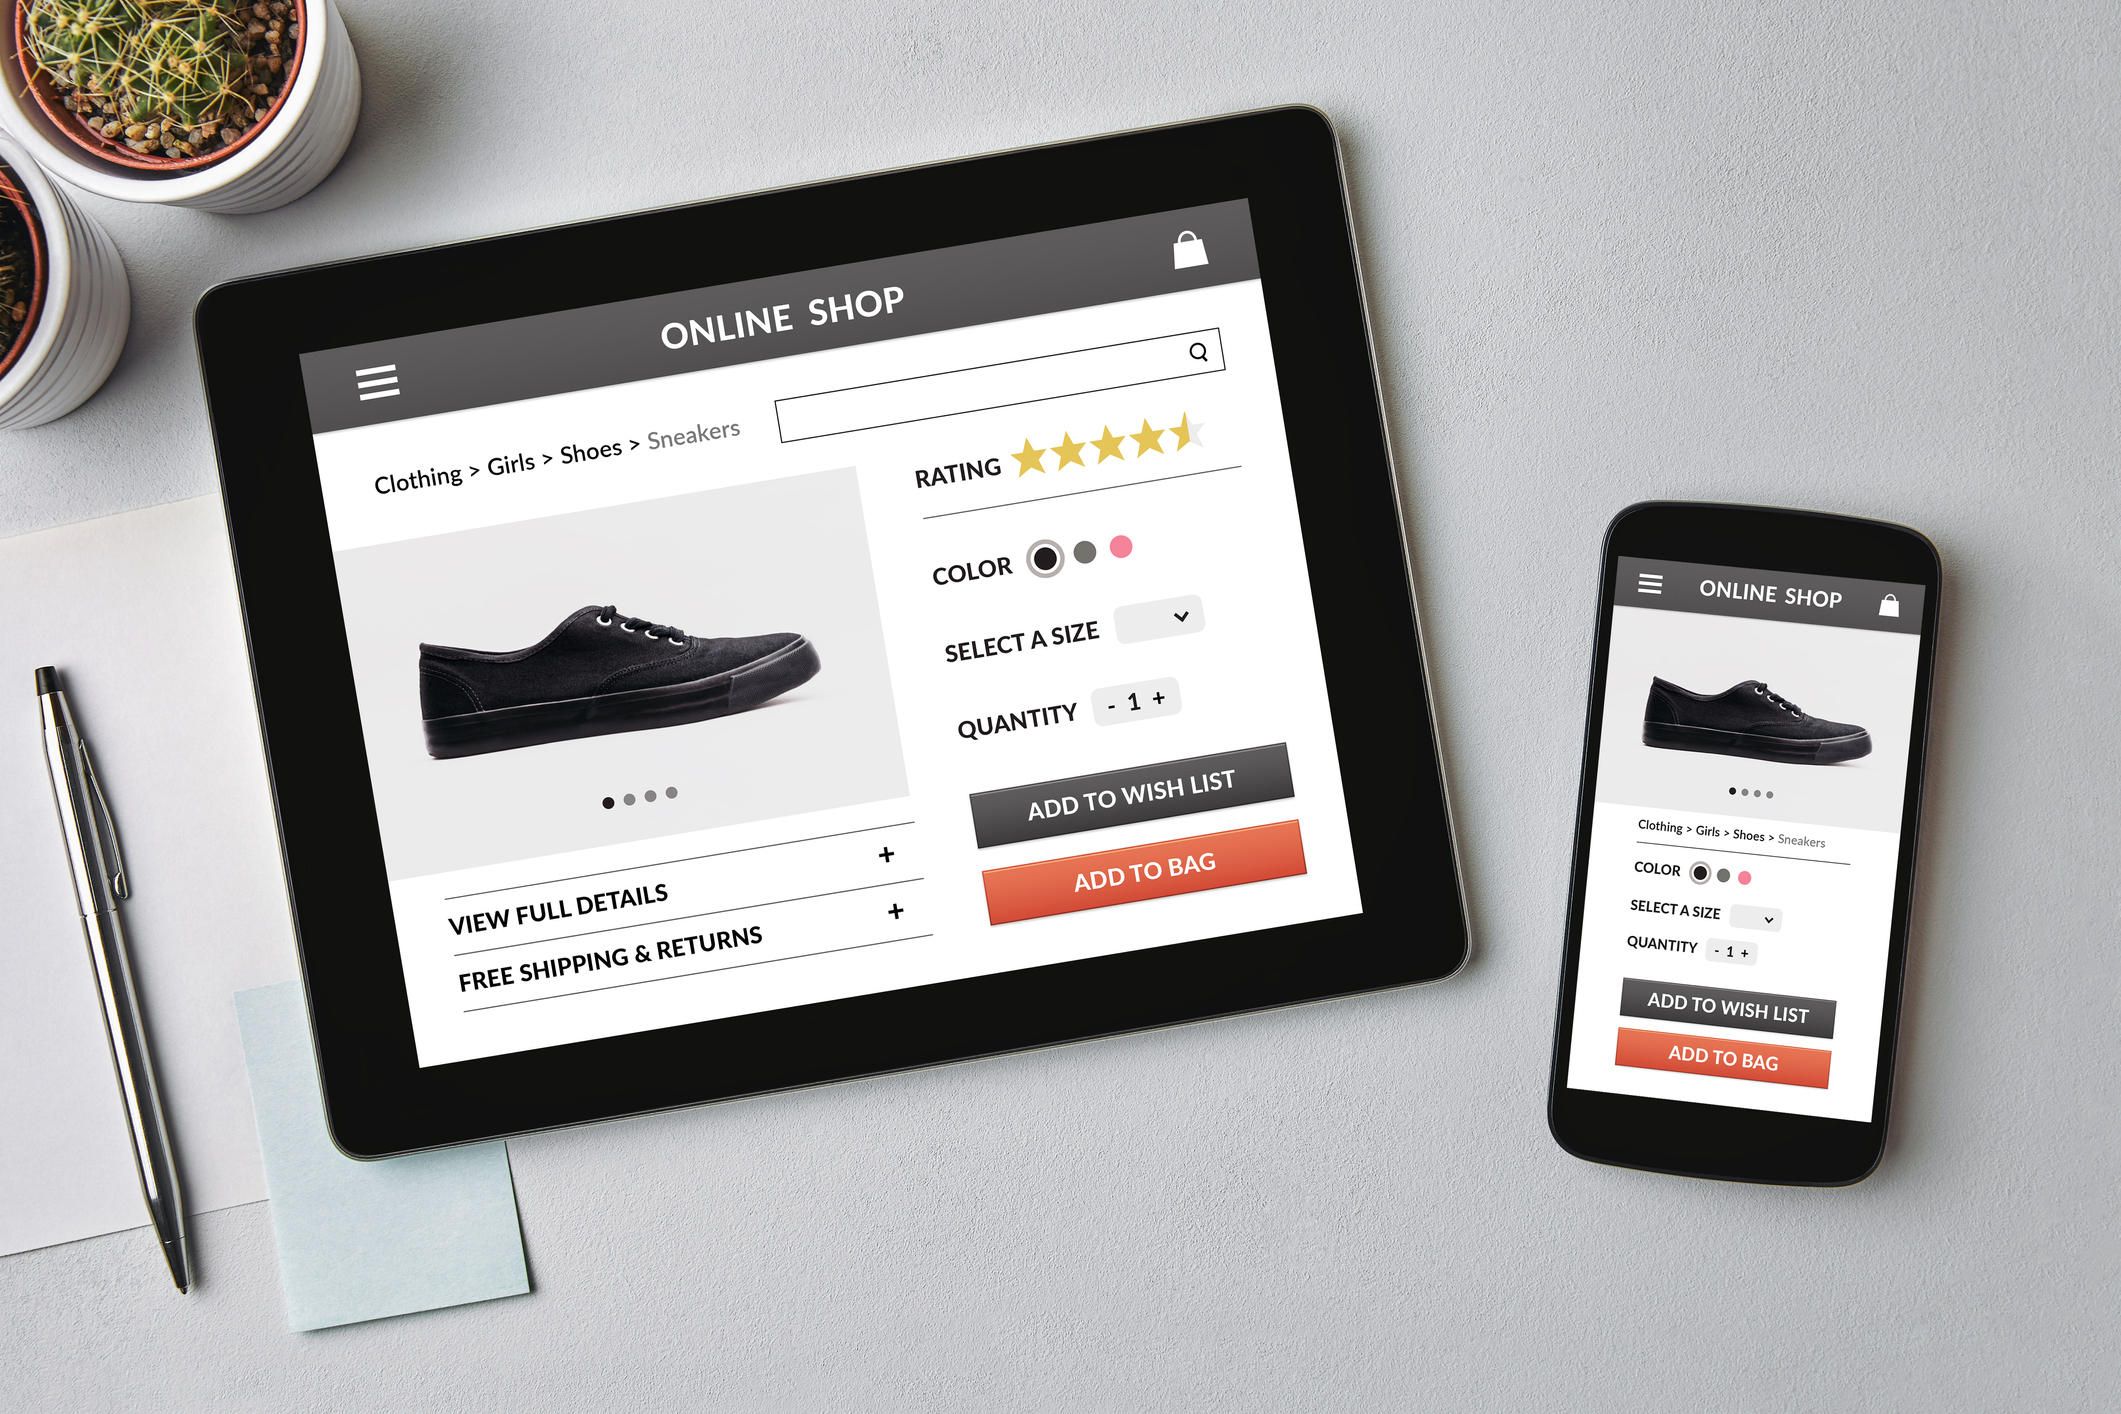 Online shop concept on tablet and smartphone